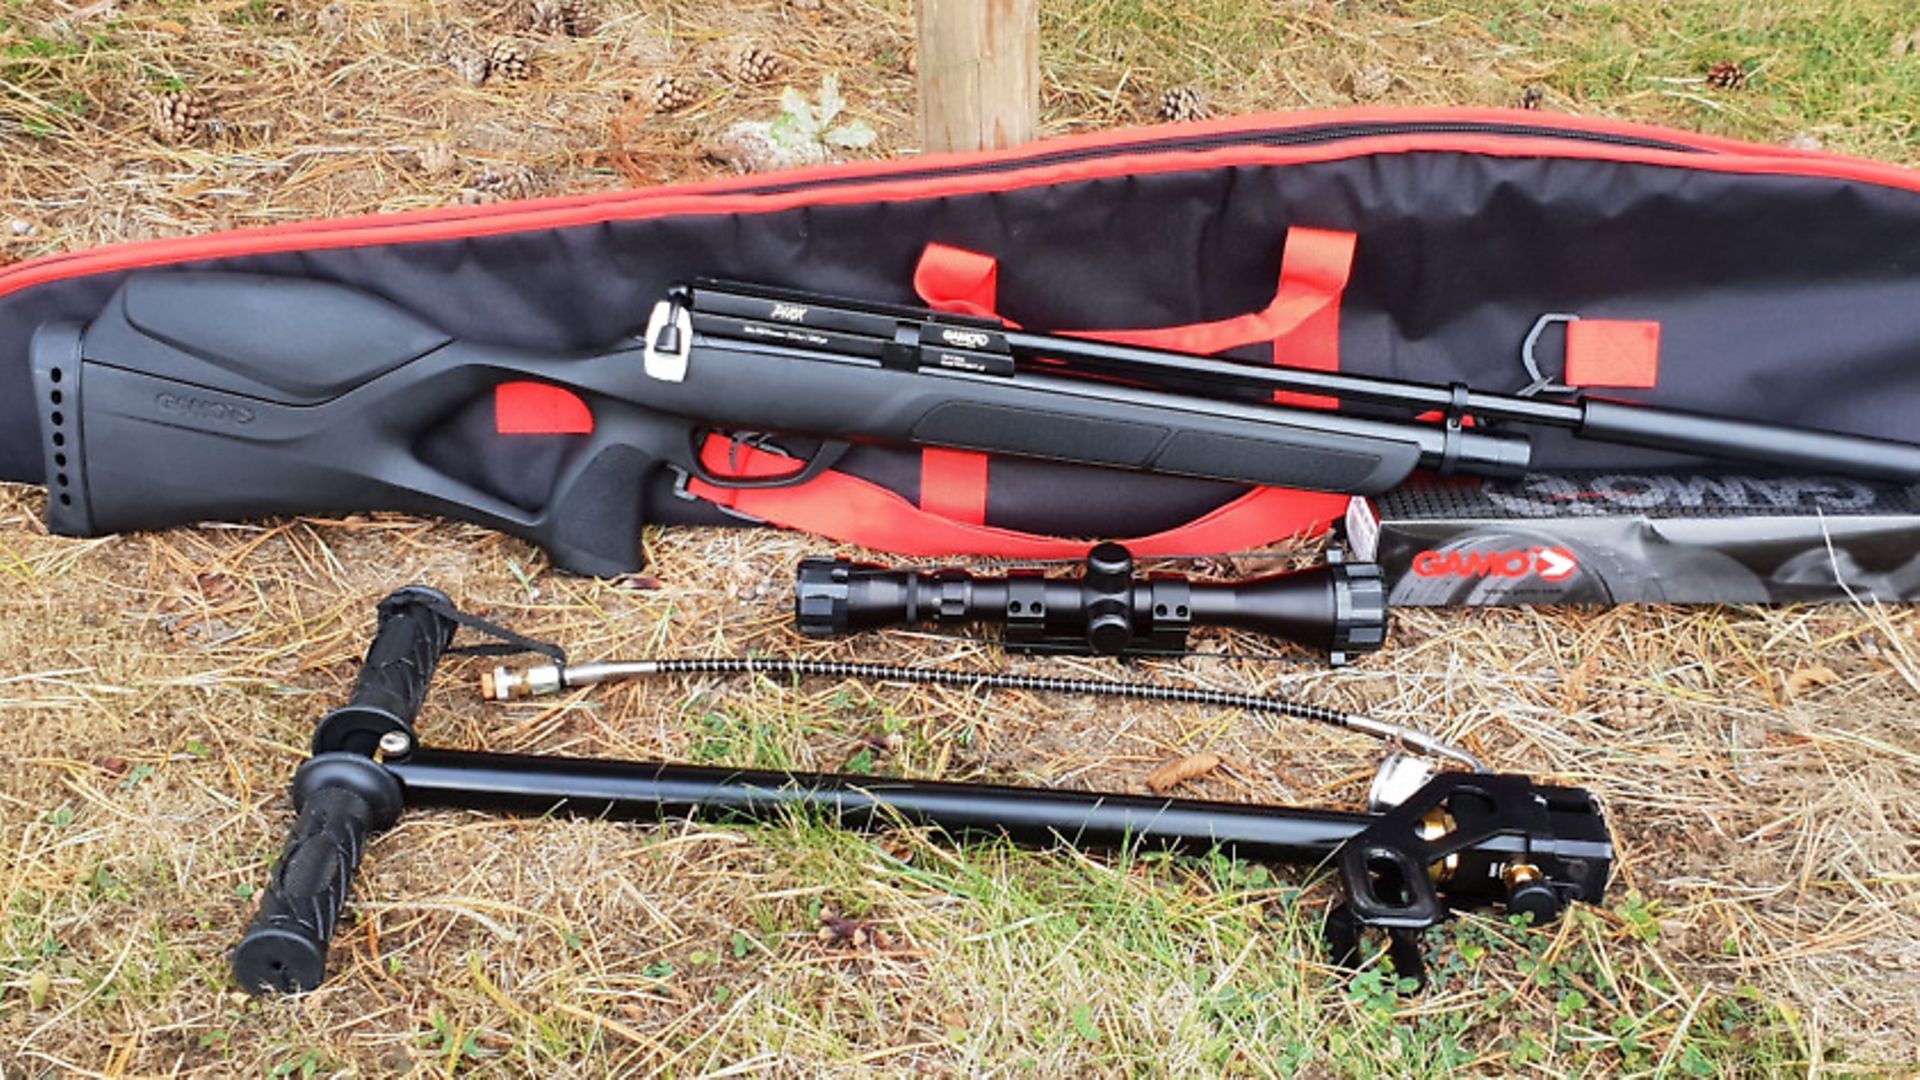 Is a springer or gas-ram air rifle best for HFT?